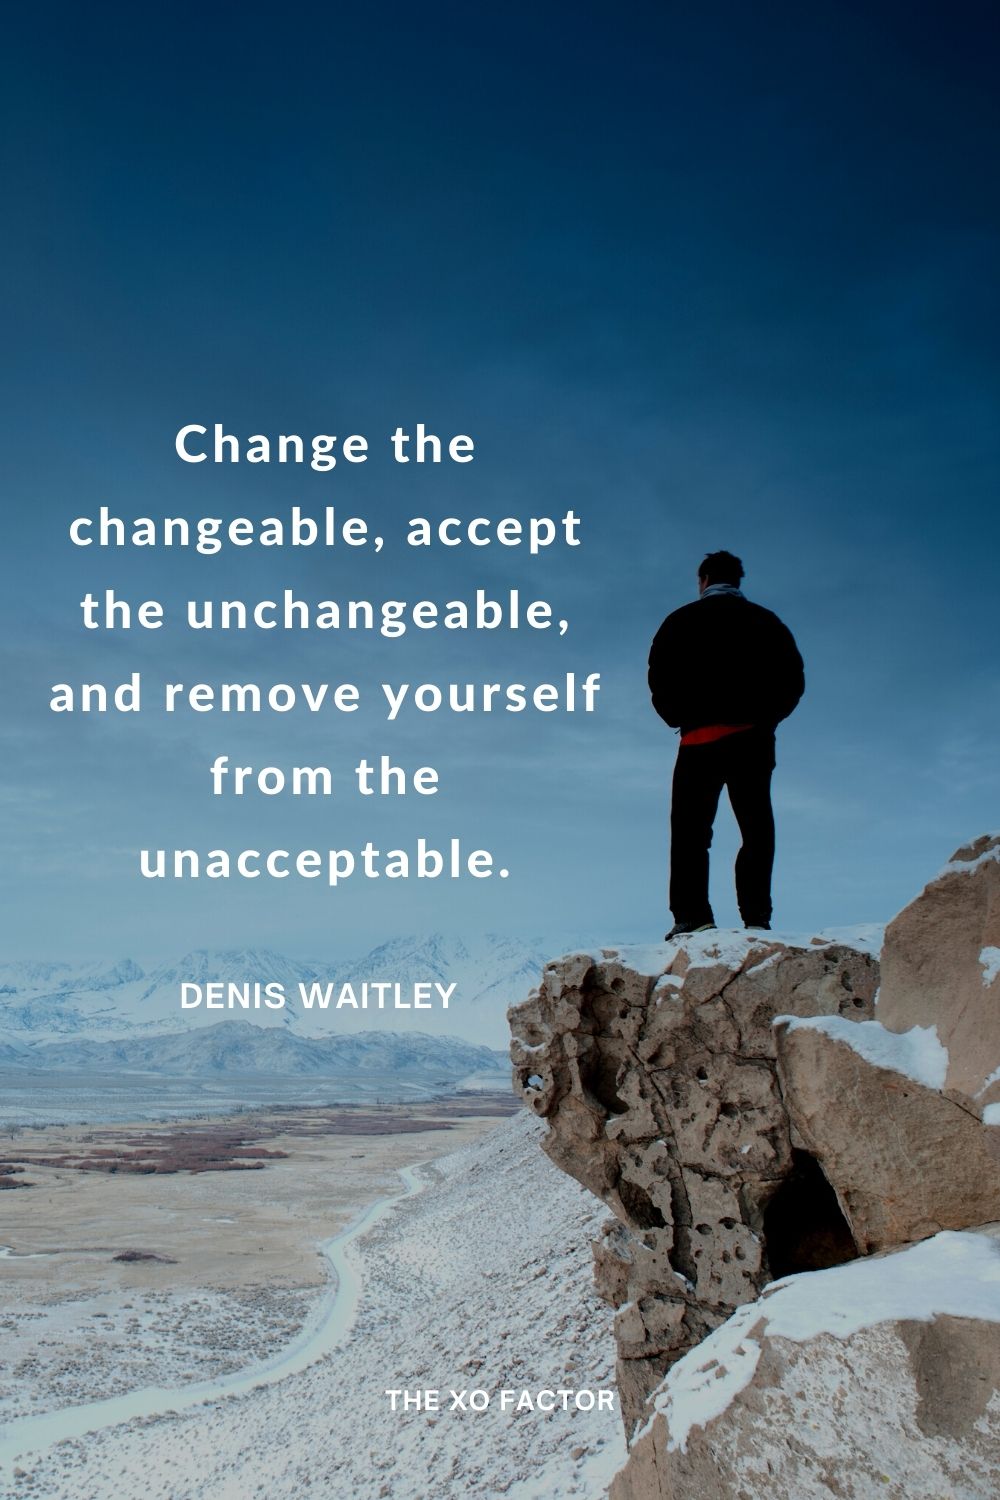 Change the changeable, accept the unchangeable, and remove yourself from the unacceptable. Denis Waitley